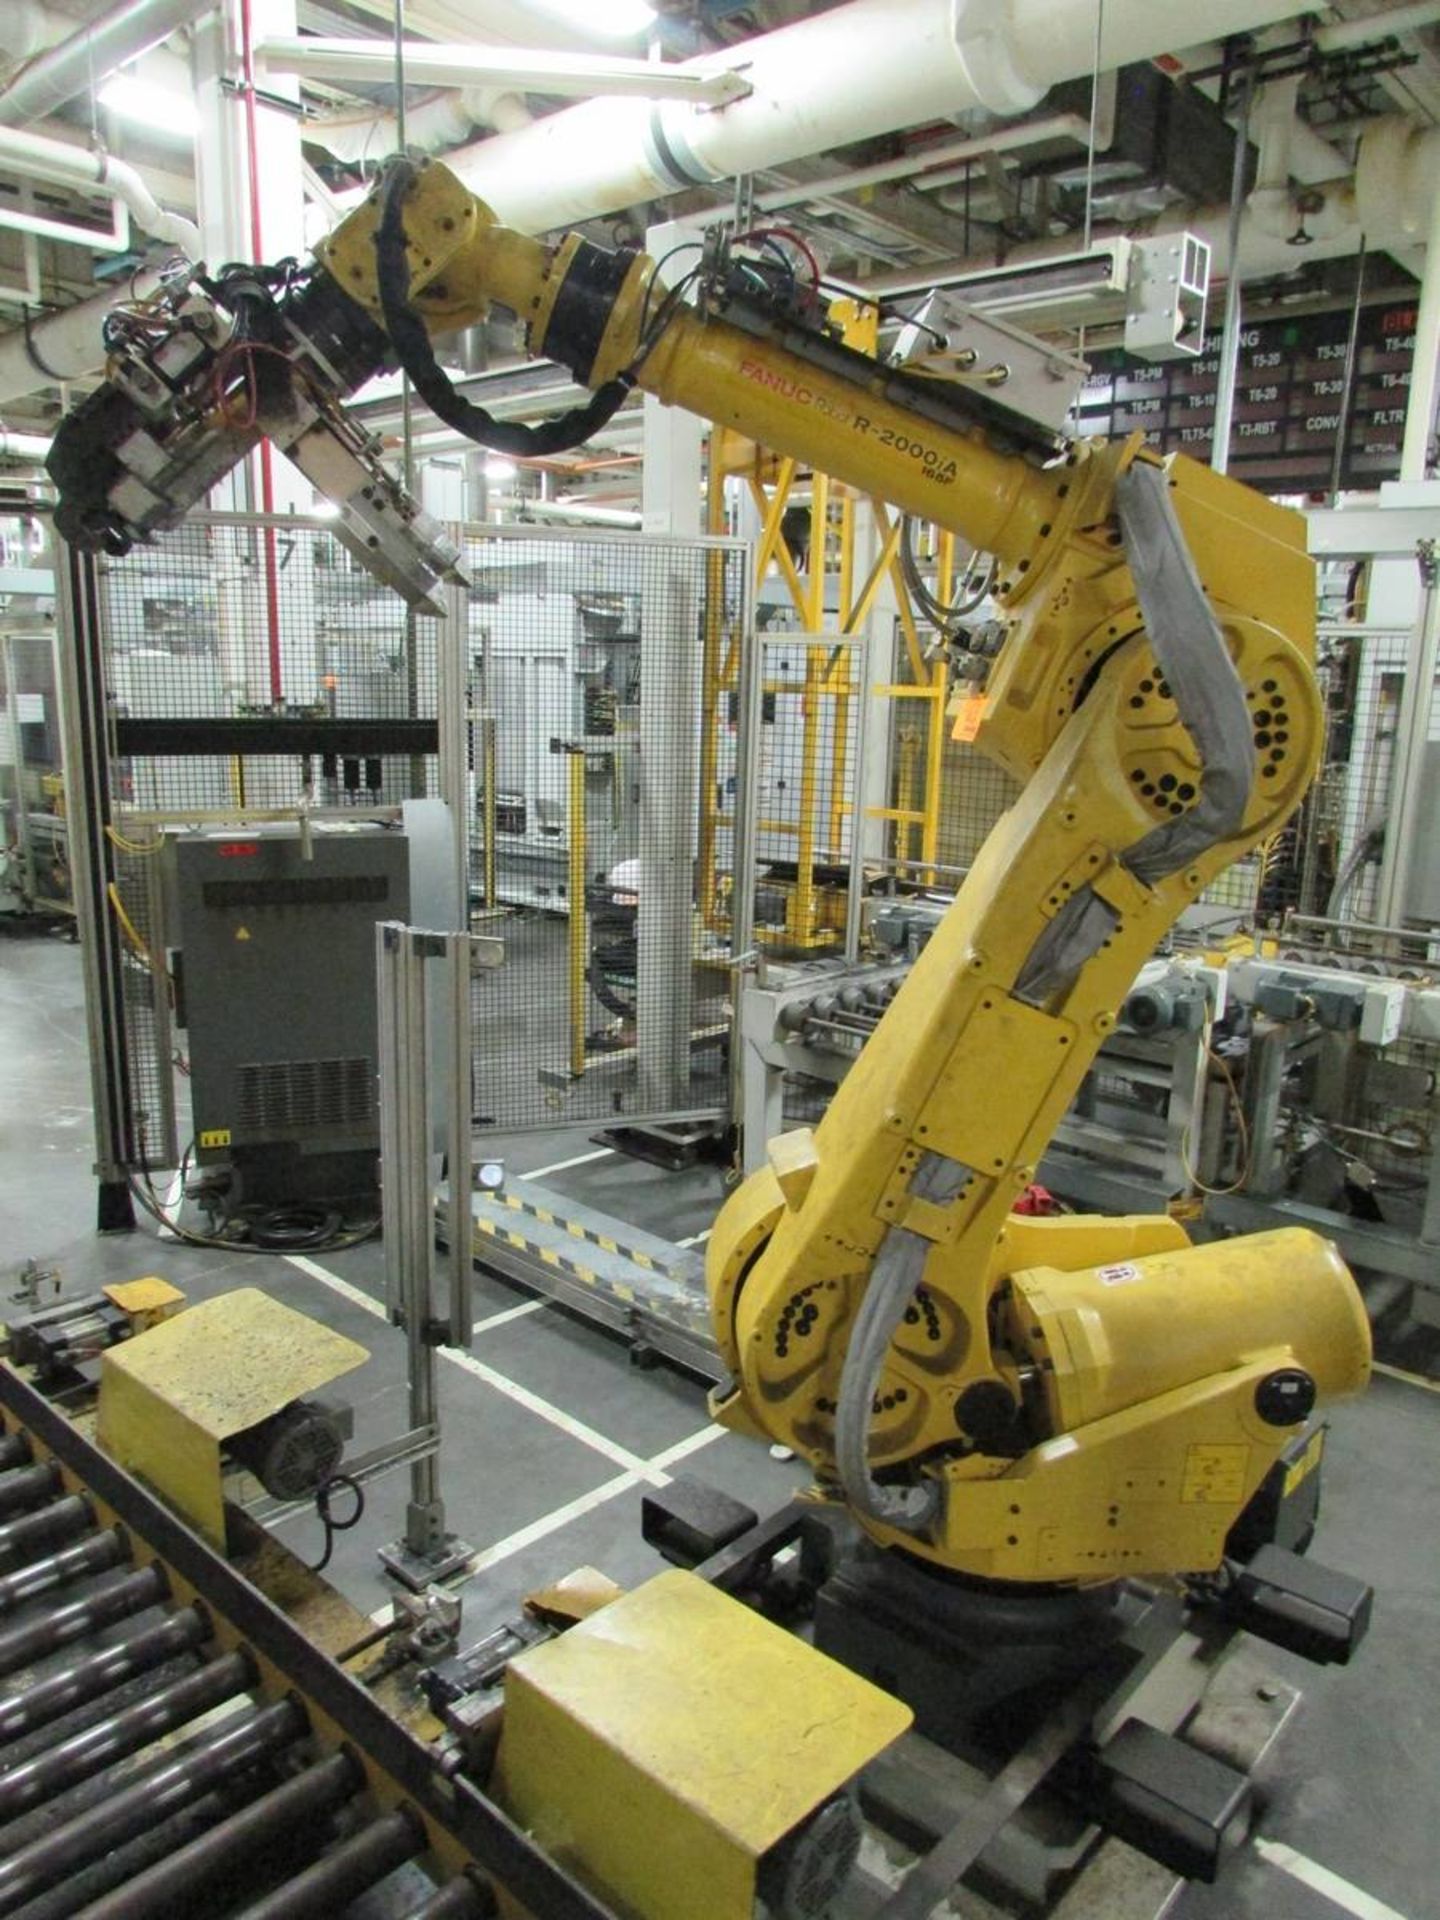 2005 Fanuc R-2000iA 165F 6 Axis Material Handling Robot - Image 4 of 8